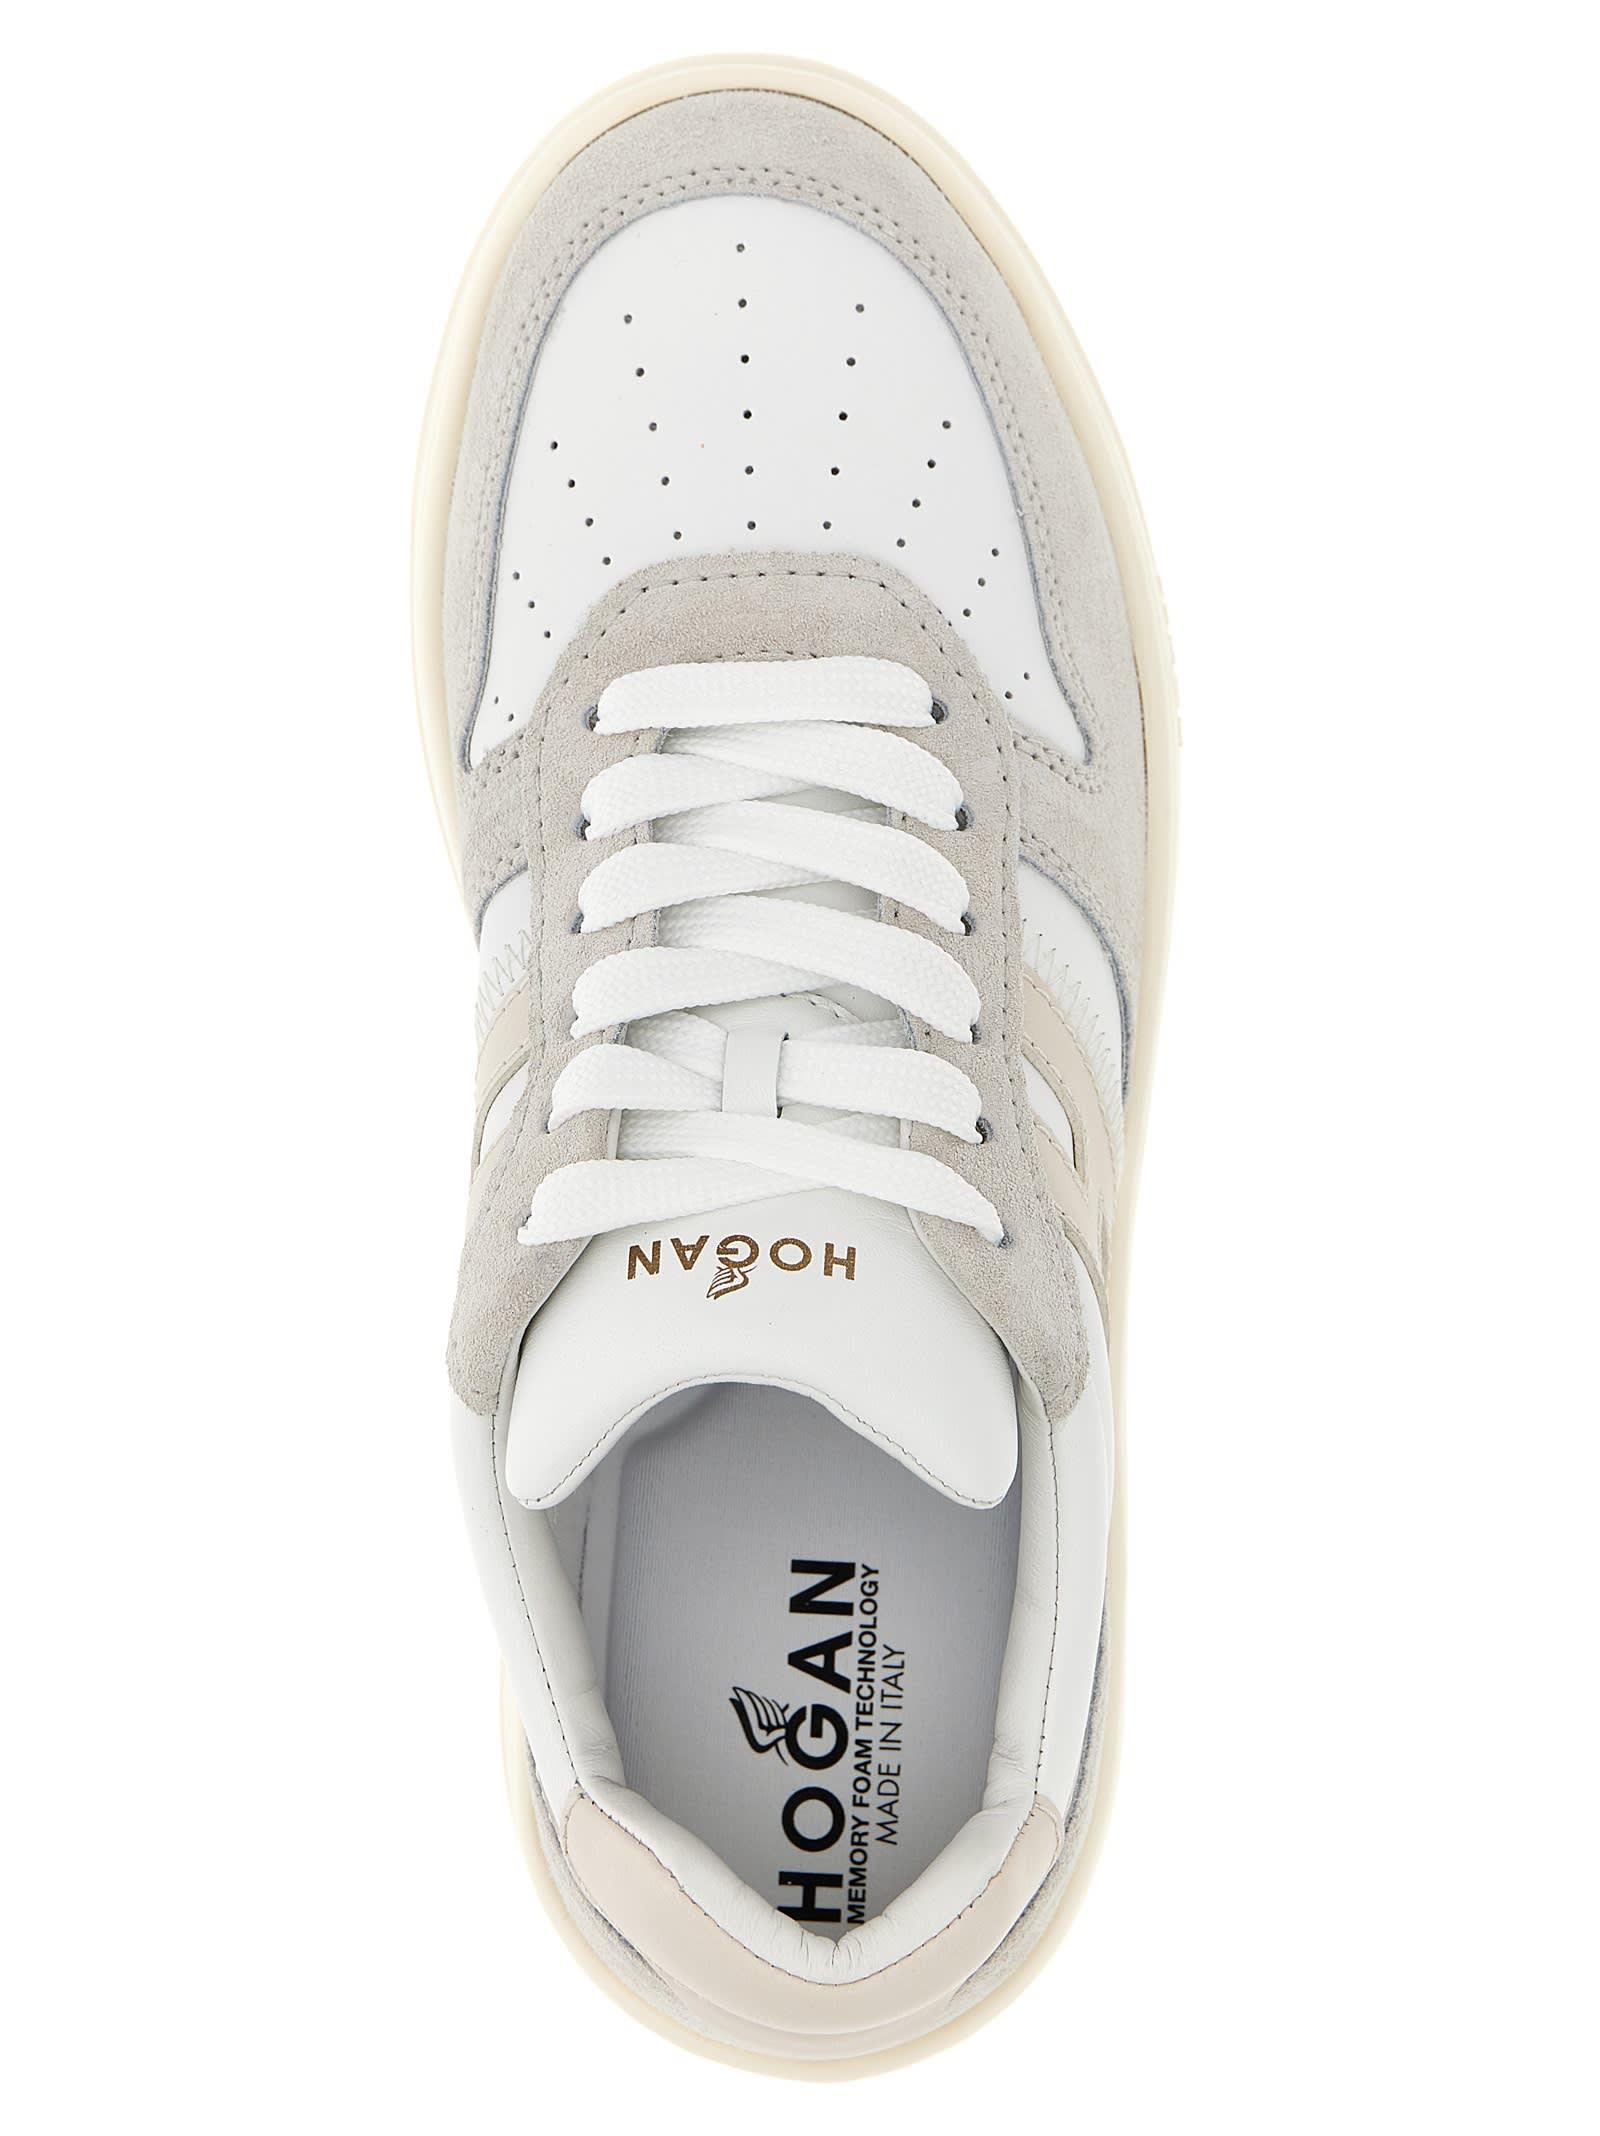 Hogan Leather Sneakers in White | Lyst